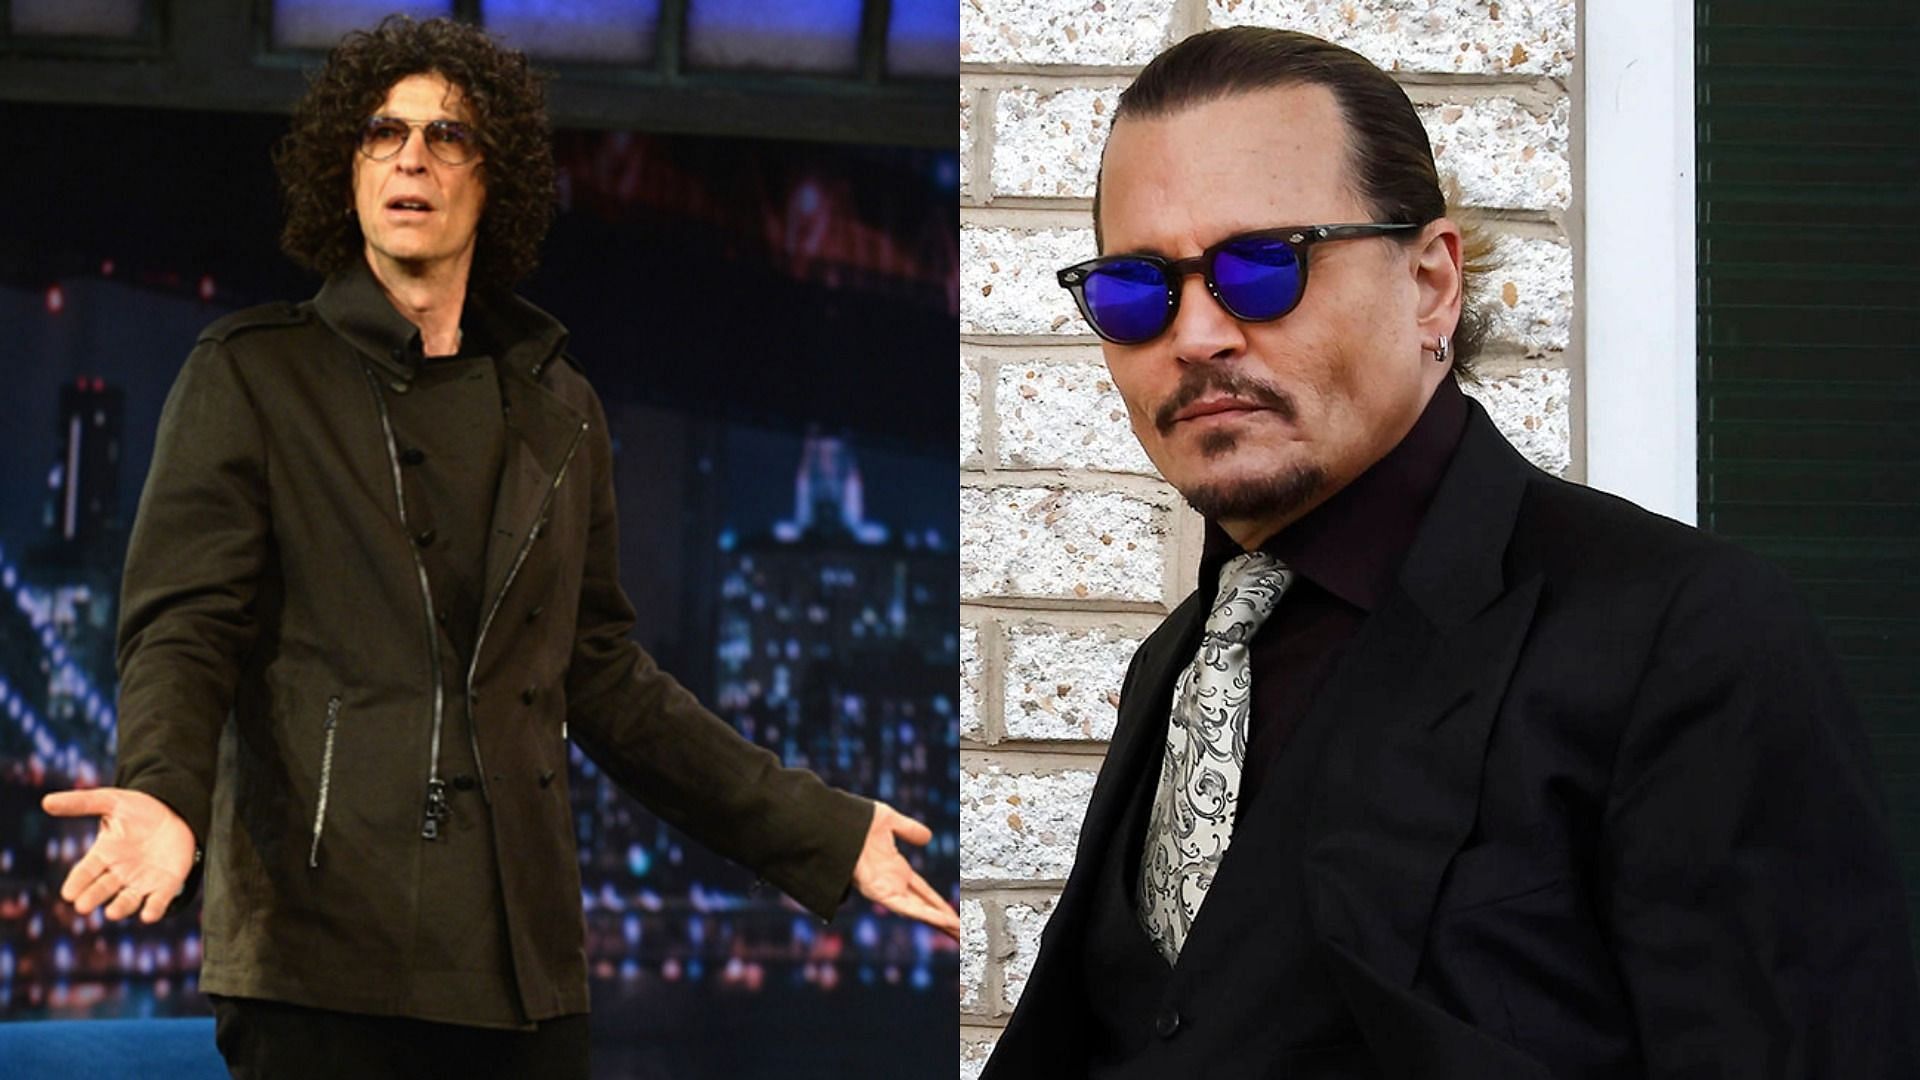 Howard Stern expressed his opinions on the current Johnny Depp defamation case during his radio show on April 25. (Image via Getty Images/Theo Wargo/Paul Morigi)